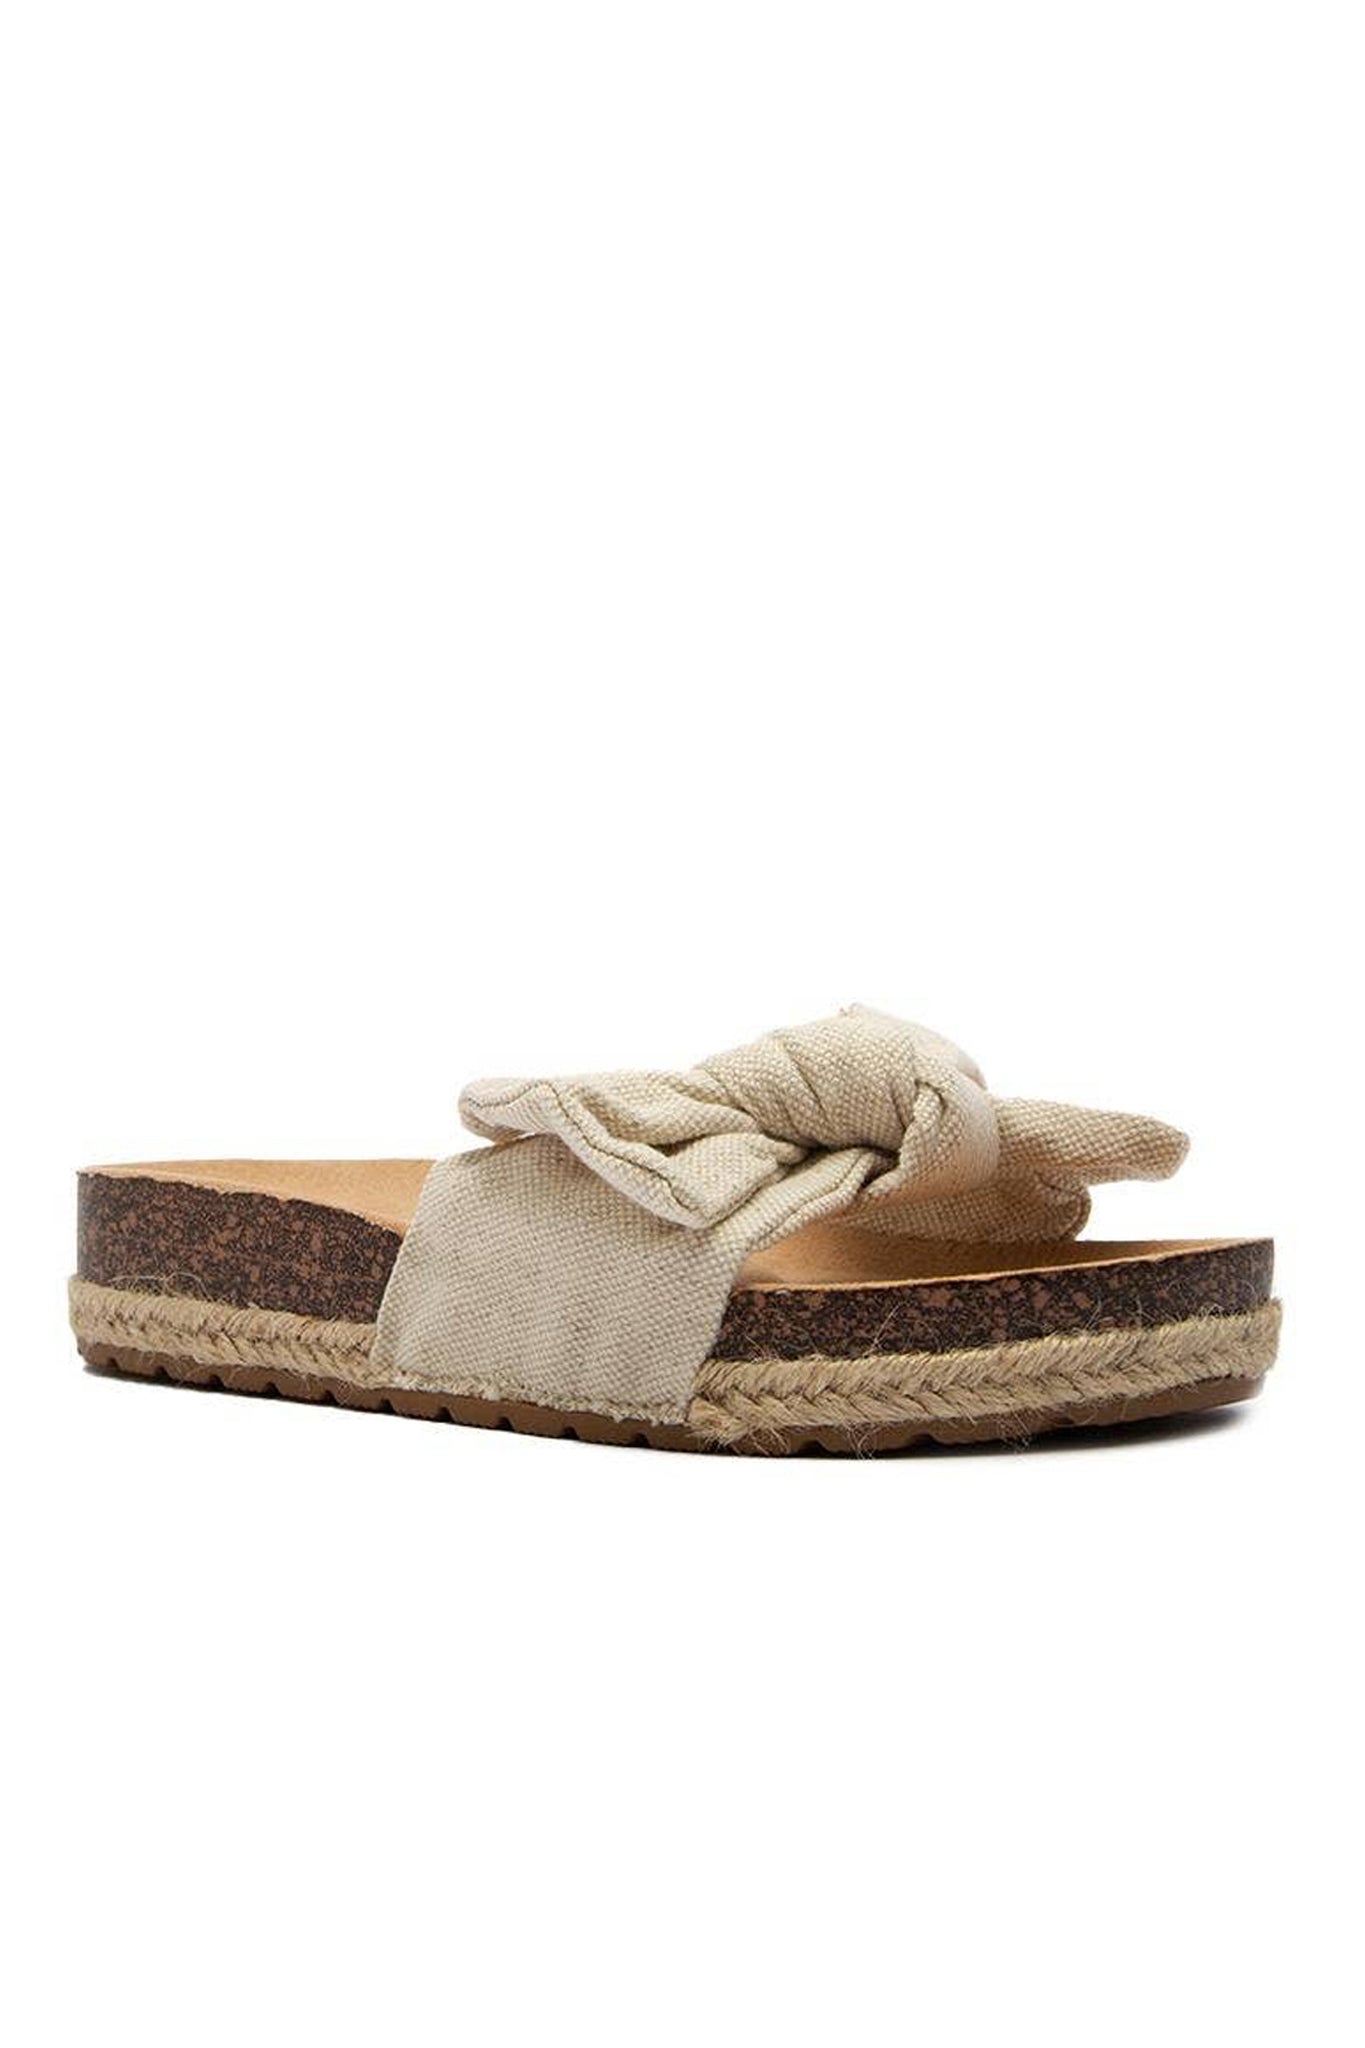 View 1 of Qupid Espadrille Slide Sandals in Beige, a Shoes from Larrea Cove. Detail: These Qupid Espadrille Slide Sandals in Beige are the perfe...